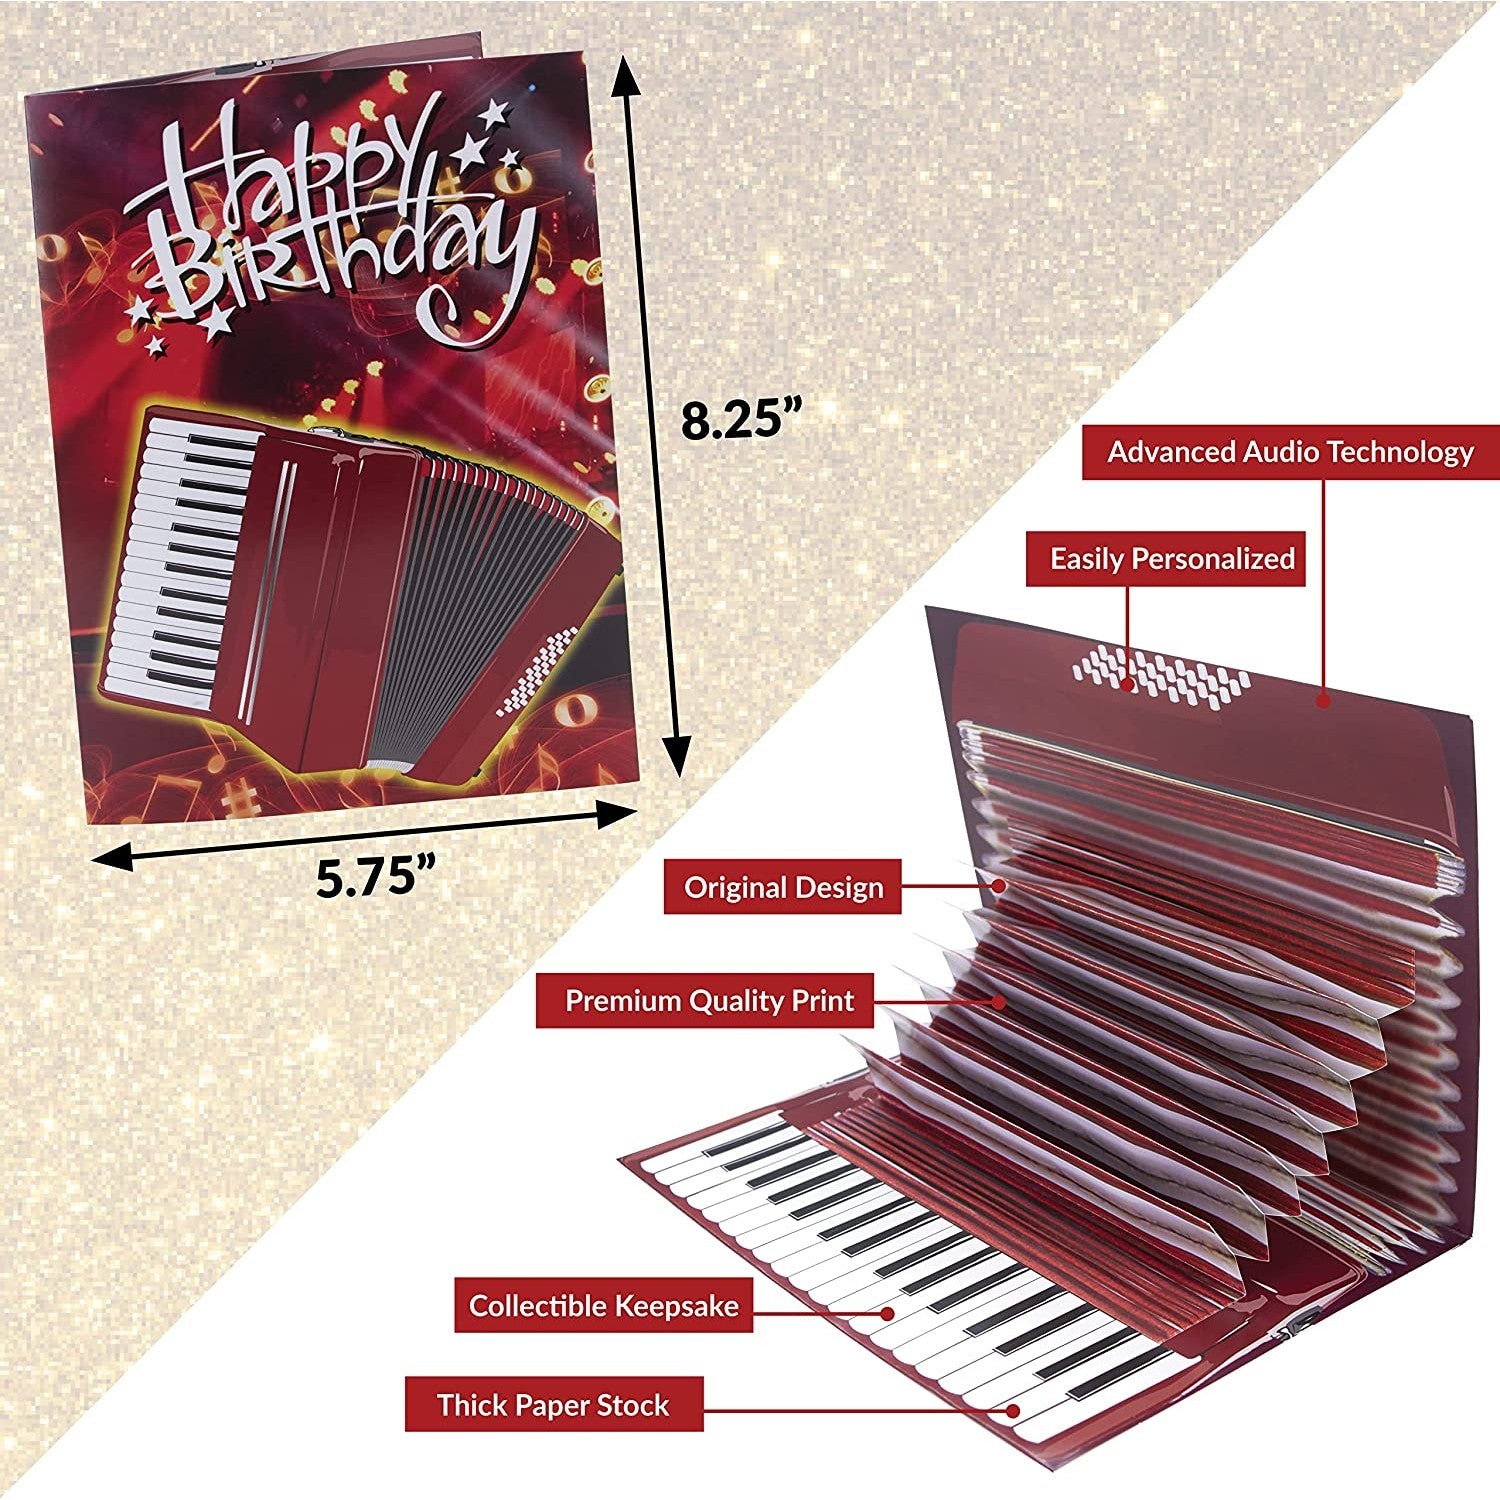 Product features for an accordion shaped birthday card.